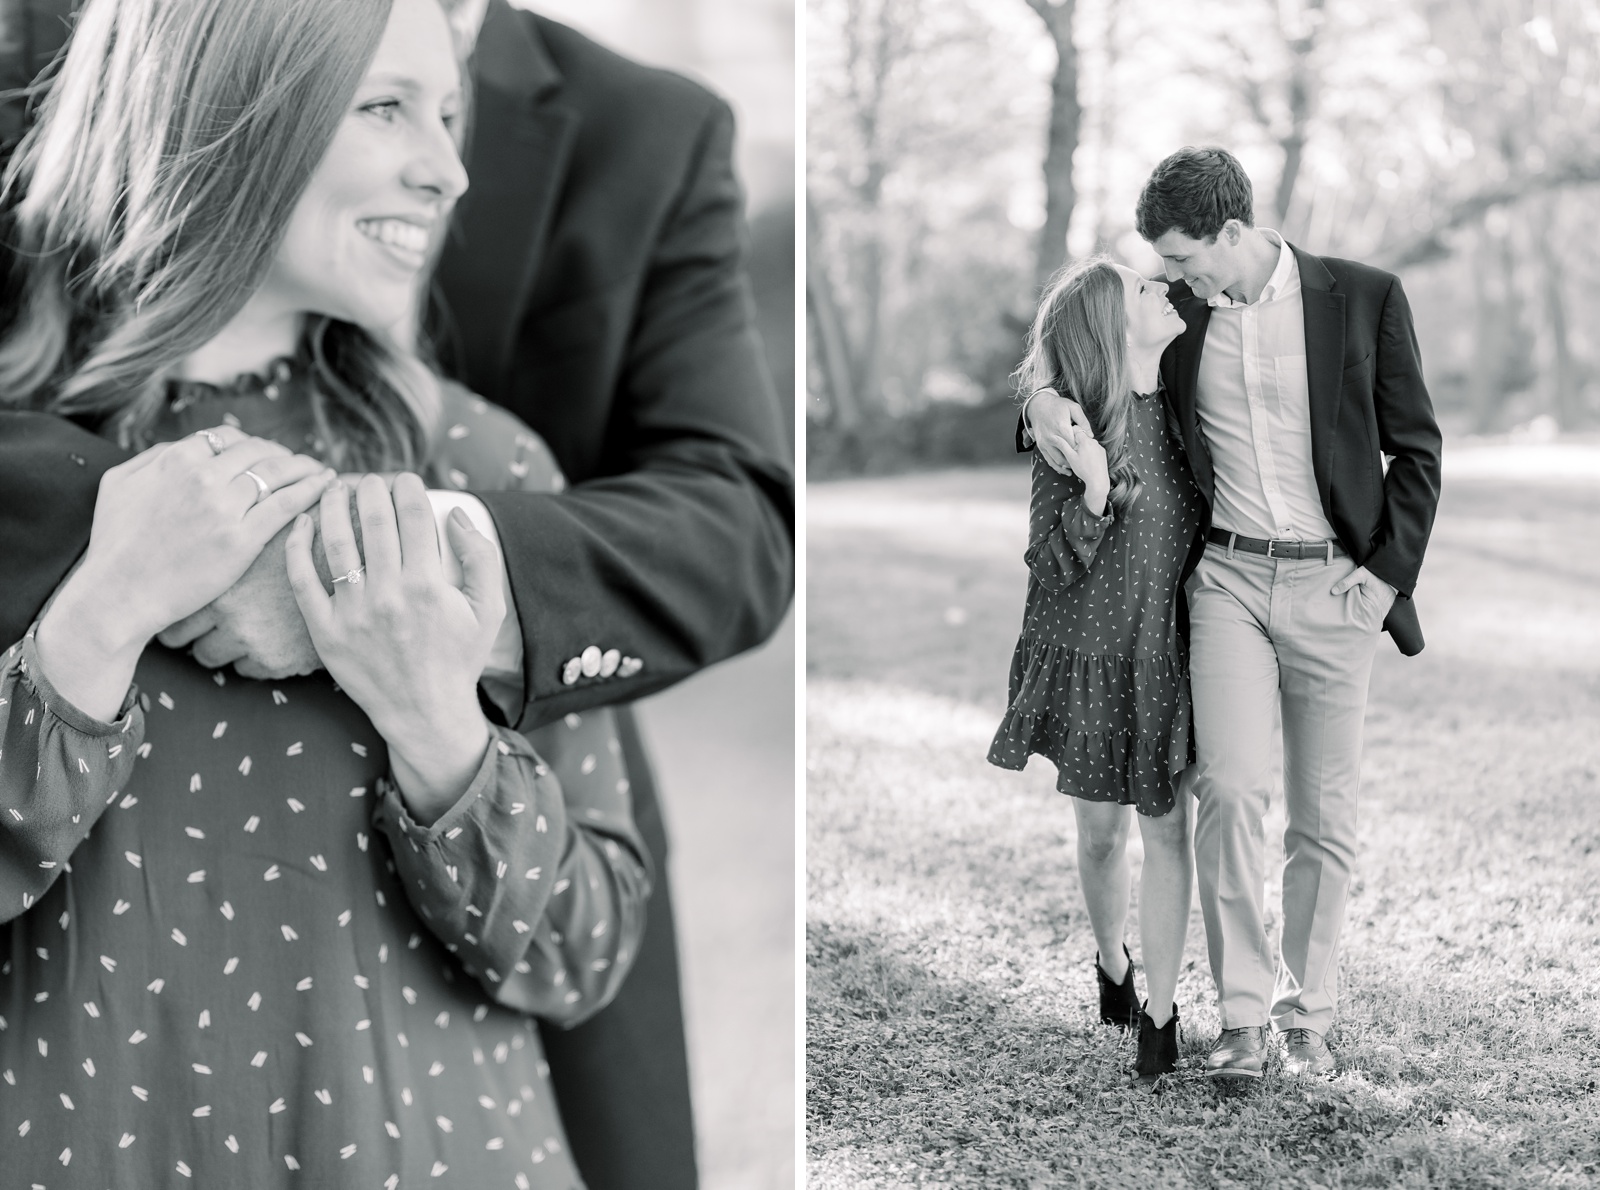 Virginia small hometown engagement session at historic home and family farm